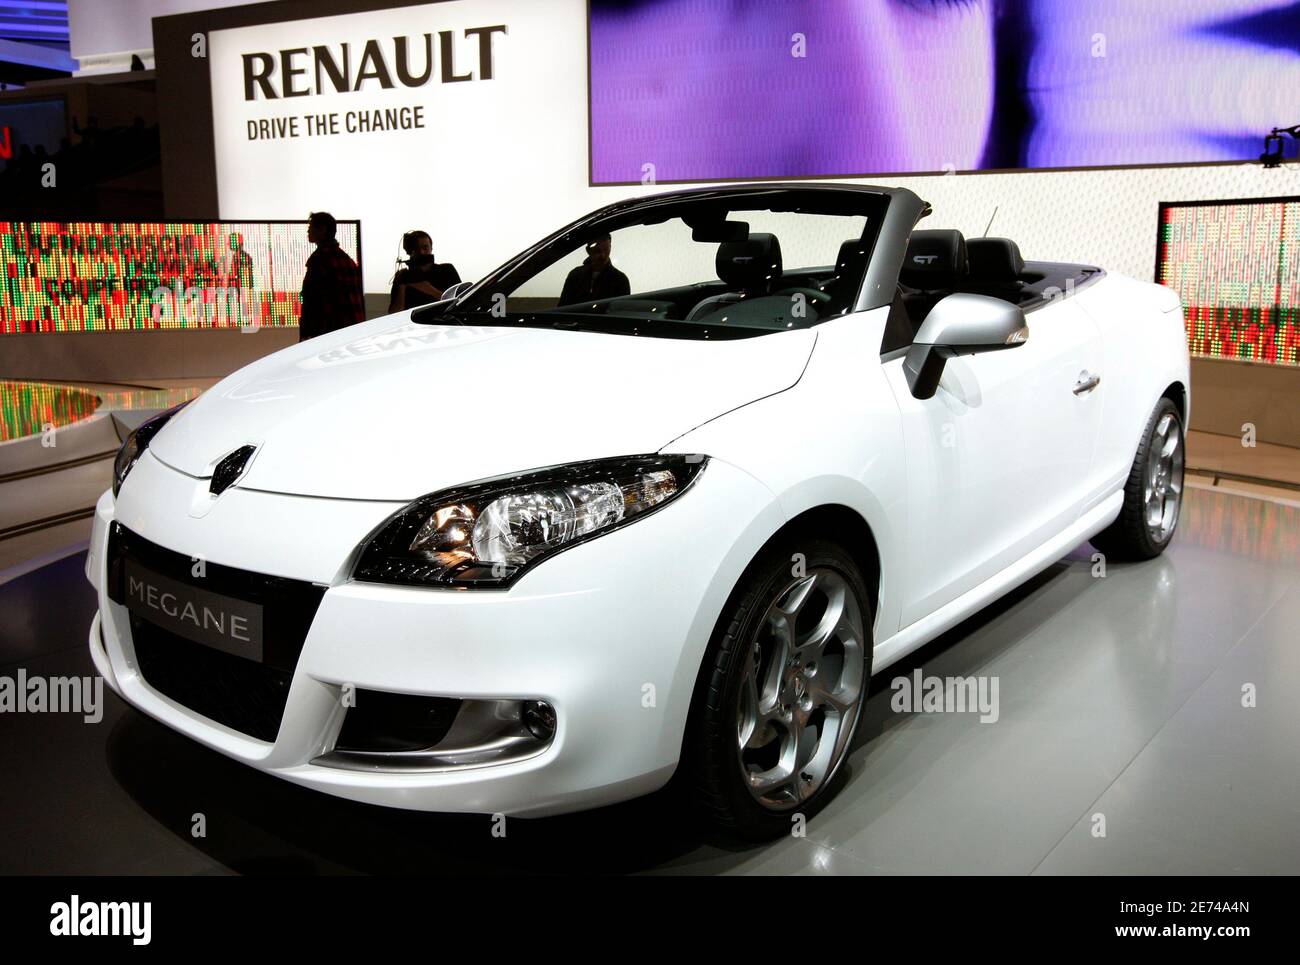 A Megane convertible car of French car manufacturer Renault is shown during  the first media day of the 80th Geneva Car Show at the Palexpo in Geneva  March 2, 2010. REUTERS/Valentin Flauraud (